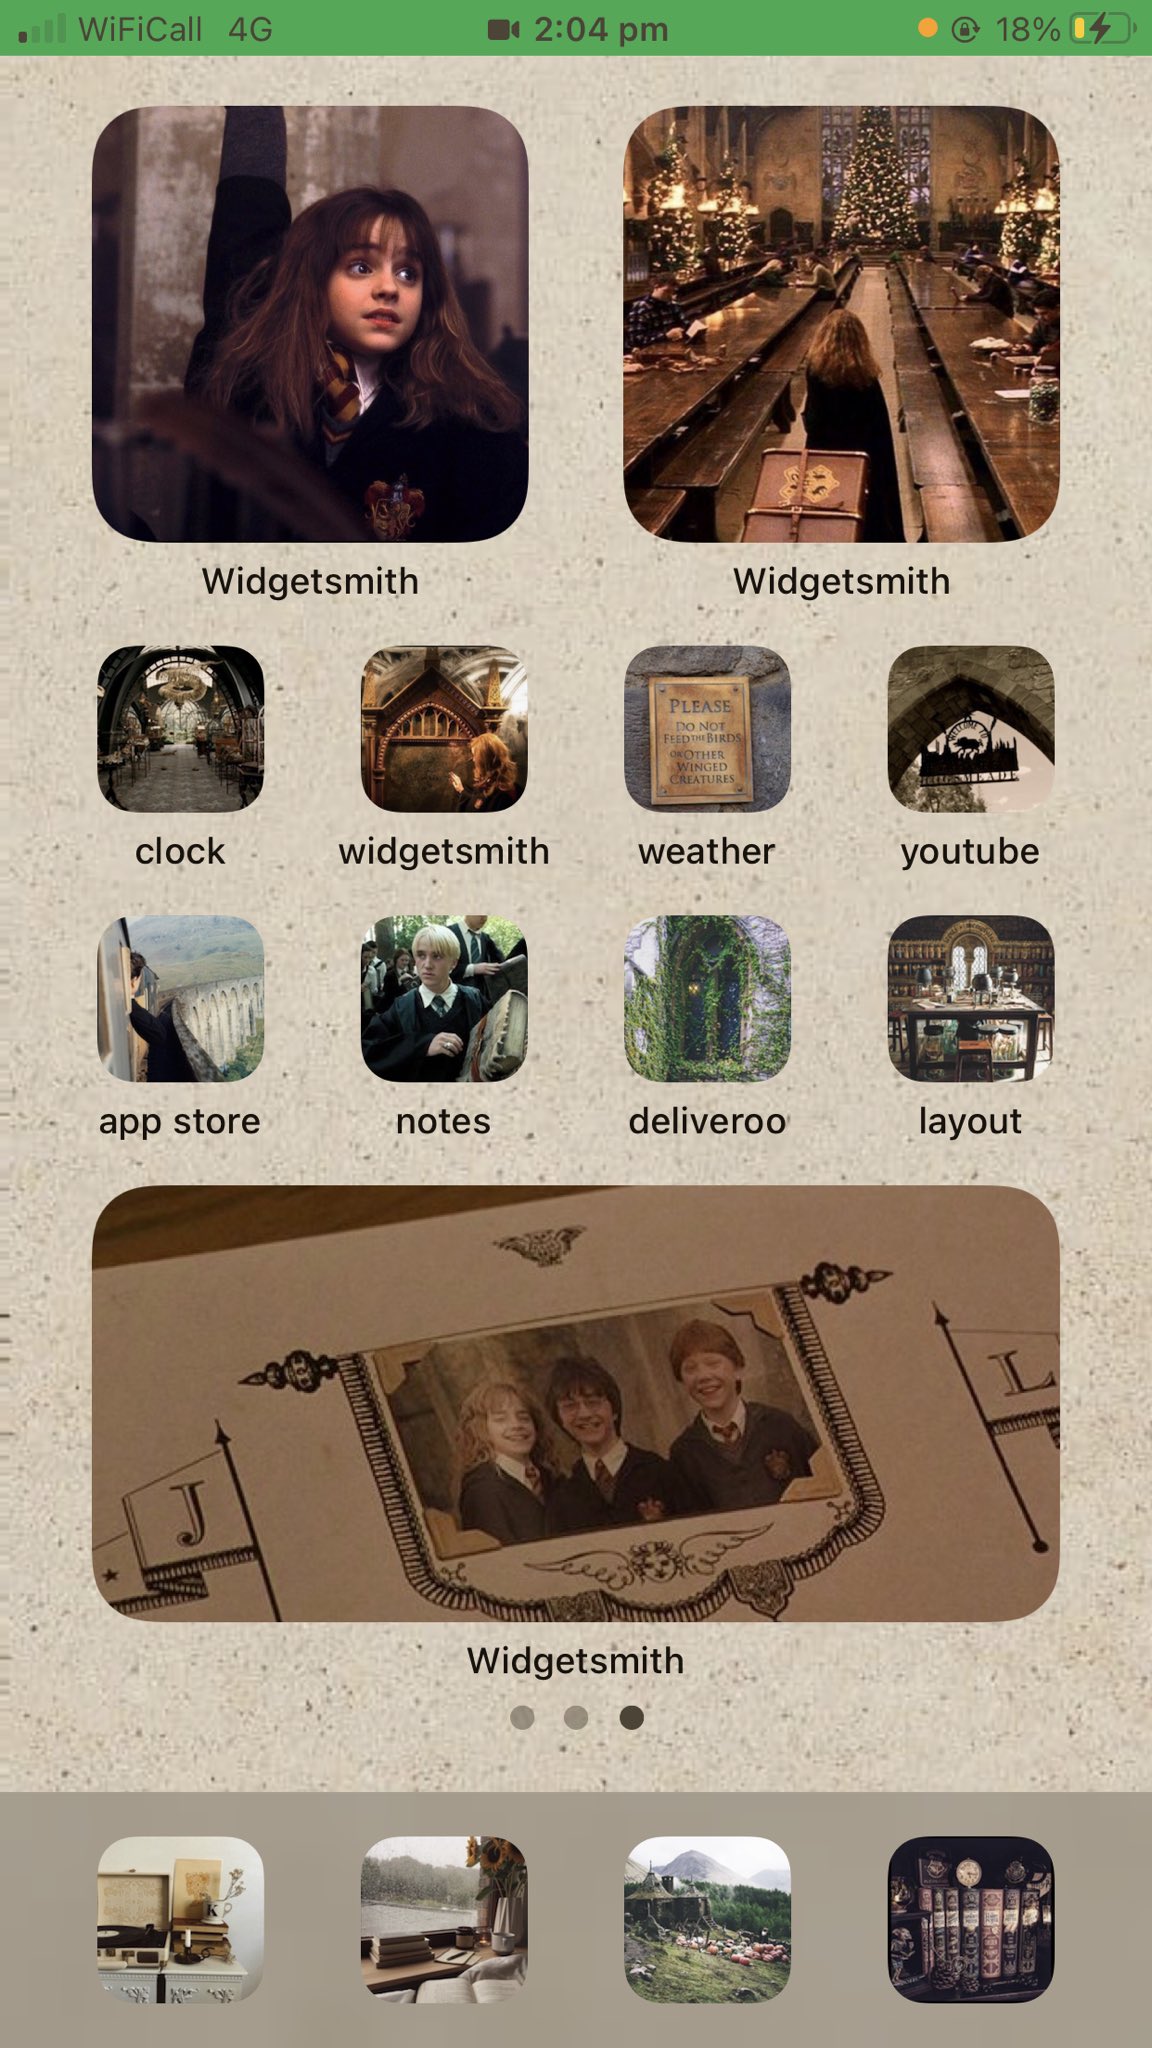 instal the new version for ios Harry Potter and the Chamber of Secrets